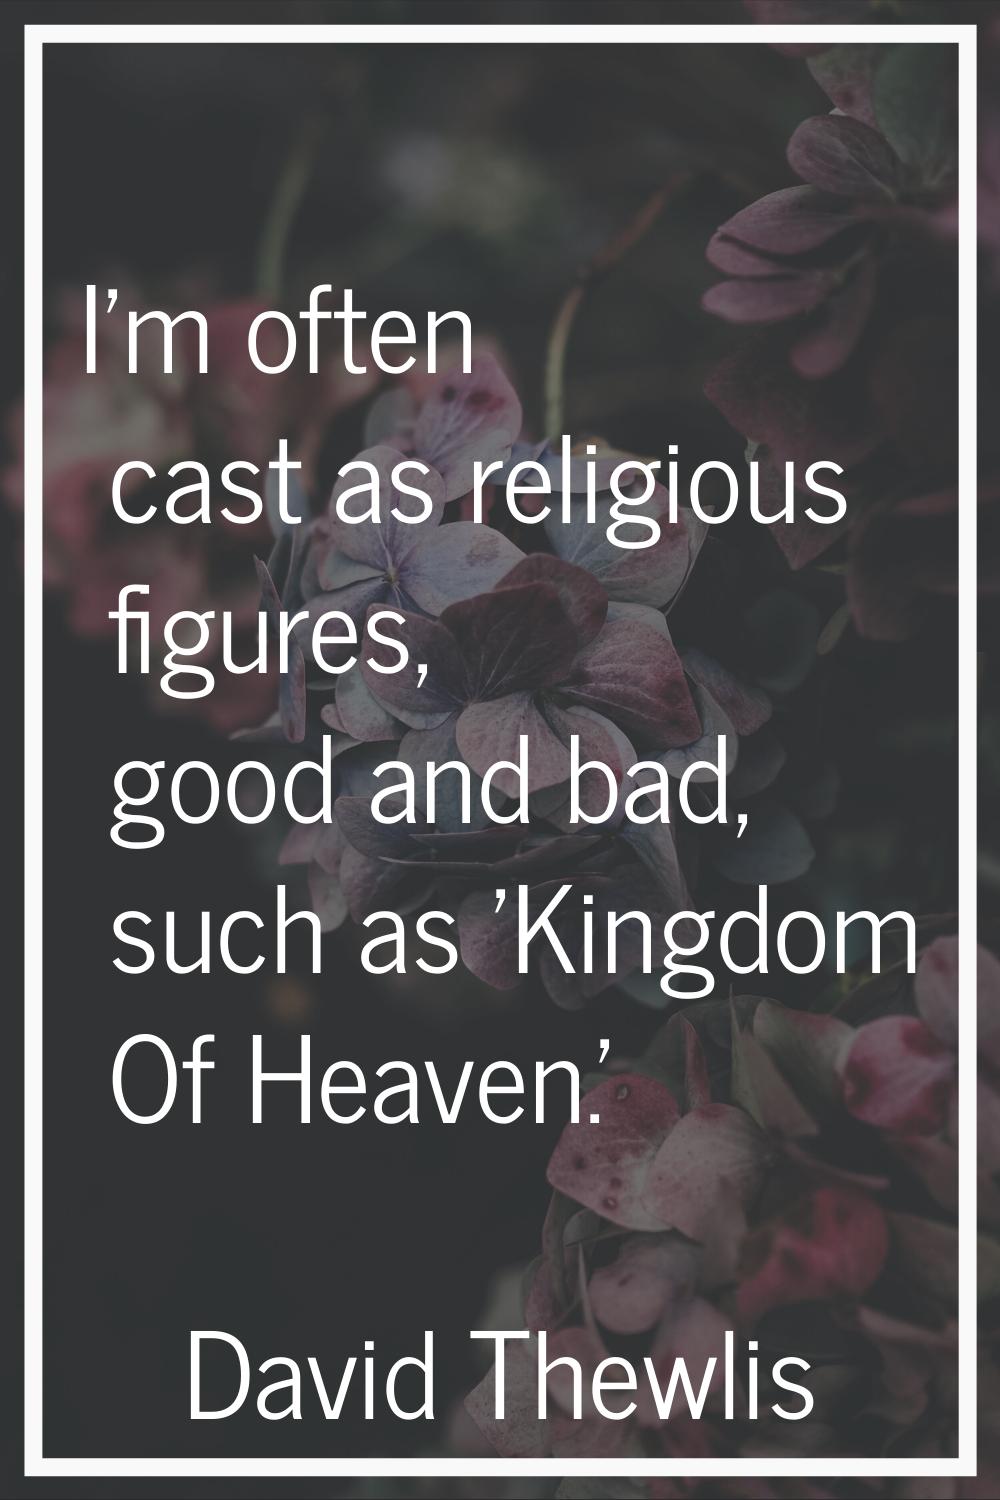 I'm often cast as religious figures, good and bad, such as 'Kingdom Of Heaven.'